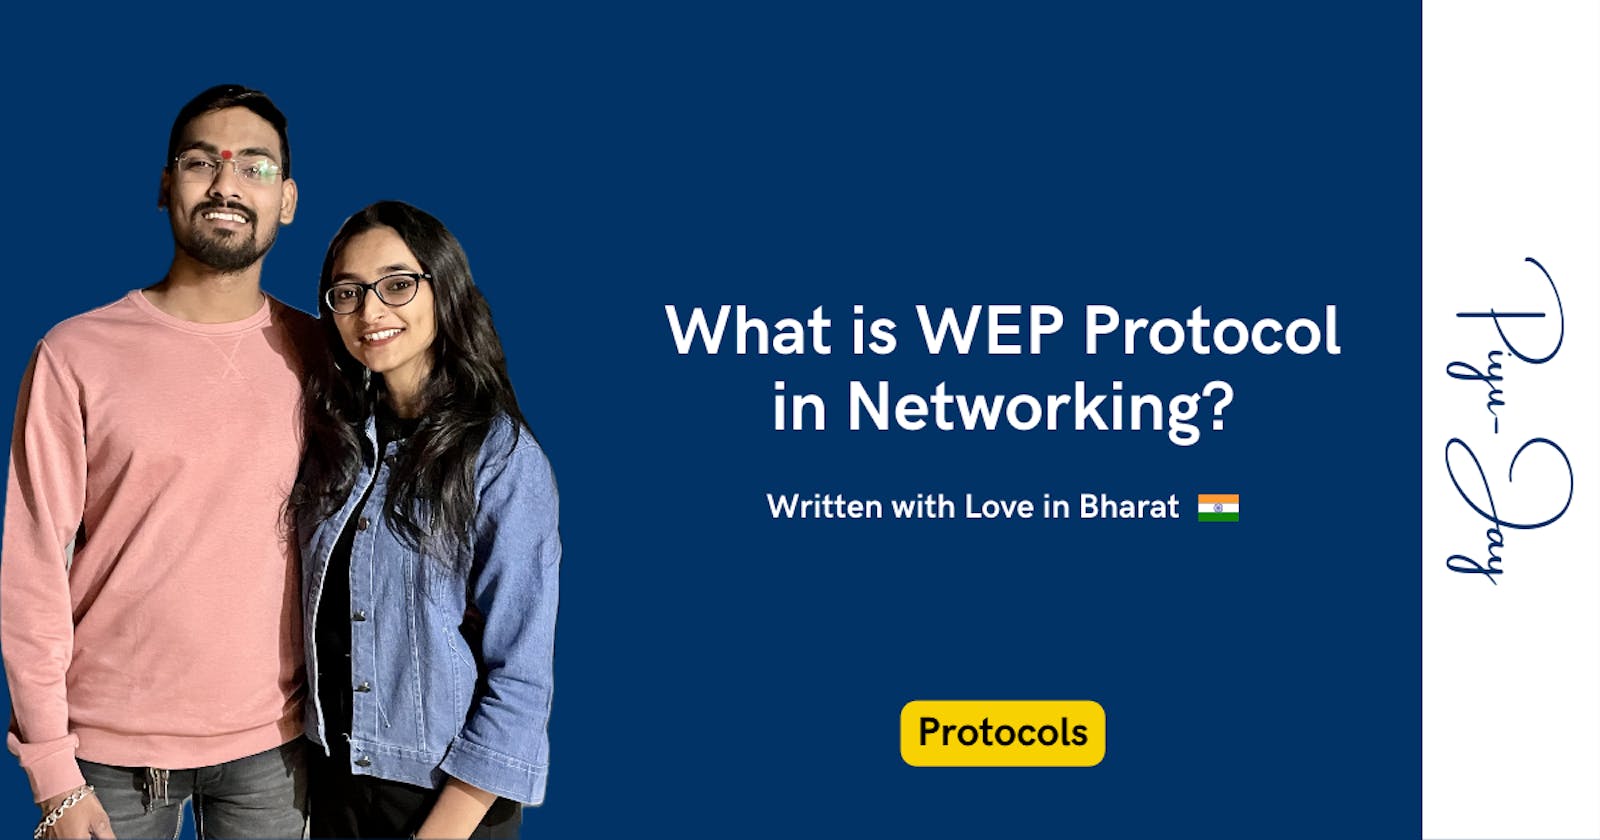 What is the WEP Protocol in Networking?